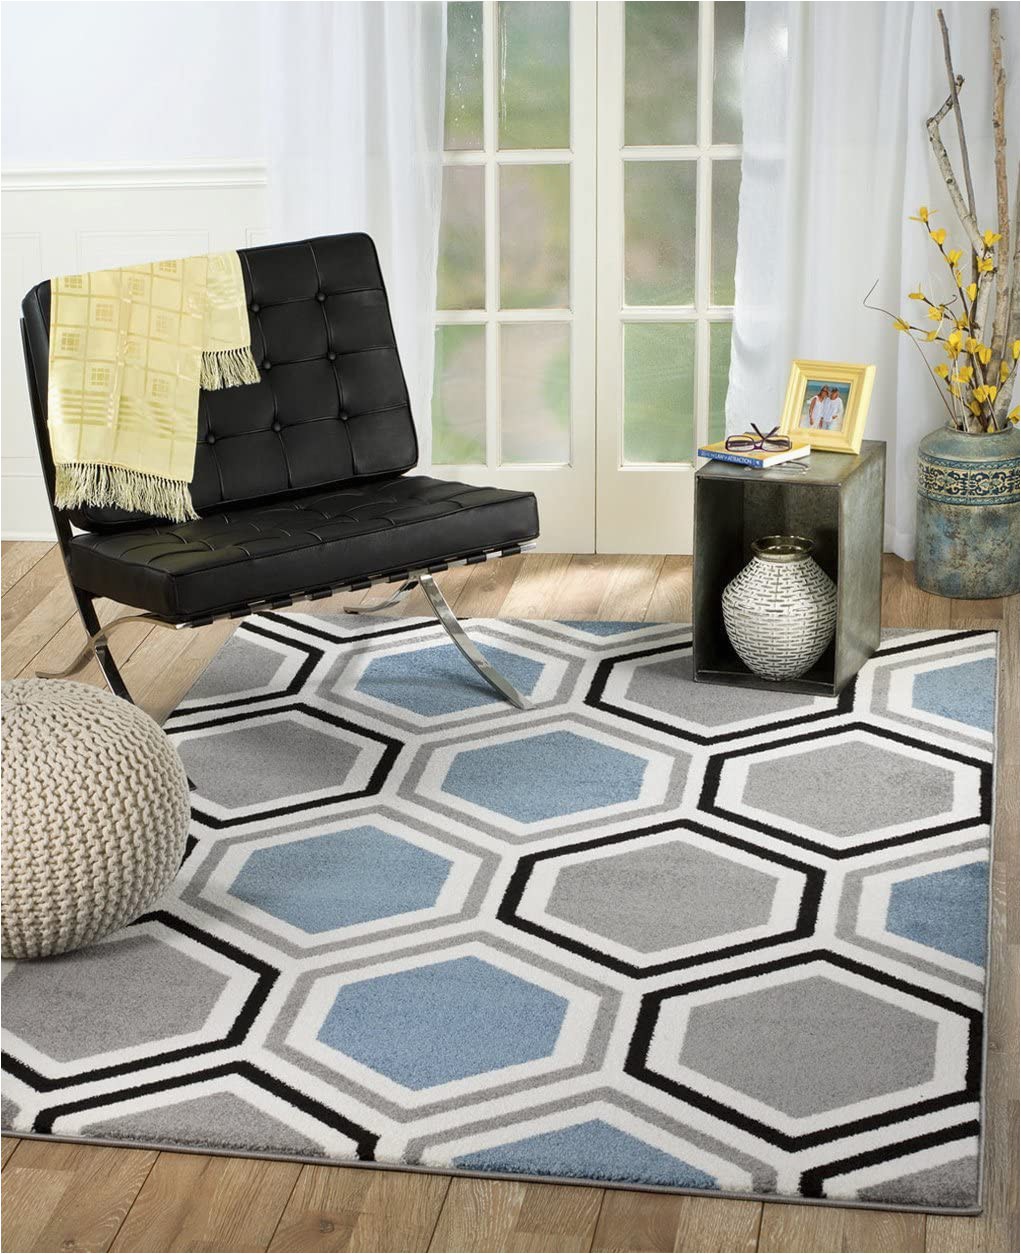 Grey and White area Rug 5×7 Rio Summit 313 Grey Blue White area Rug Modern Geometric Many Sizes Available 7 4" X 6" 7 4" X 10 6"